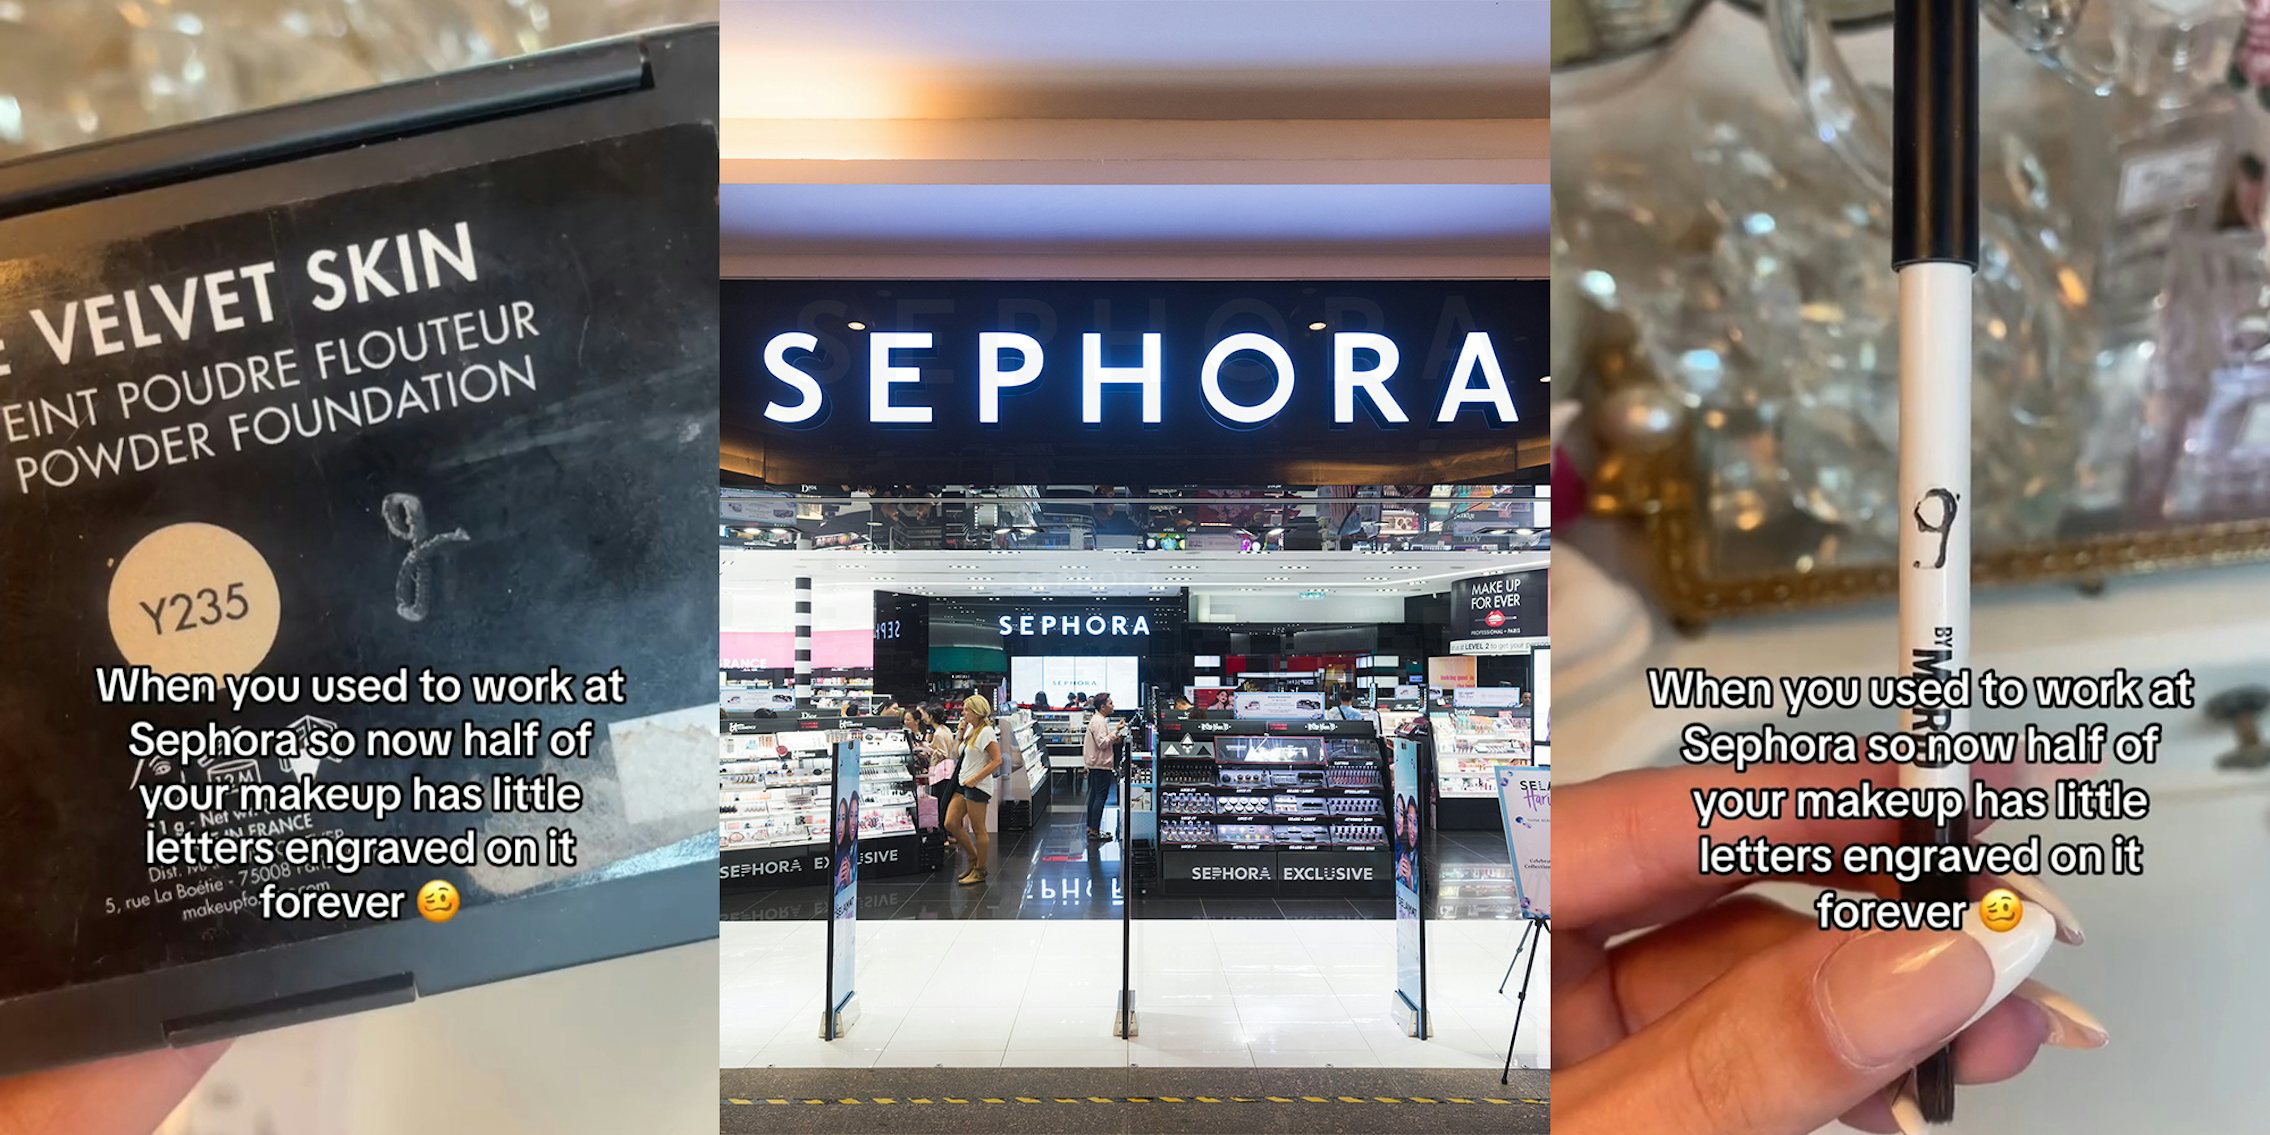 Here's What Sephora Employees Don't Tell You